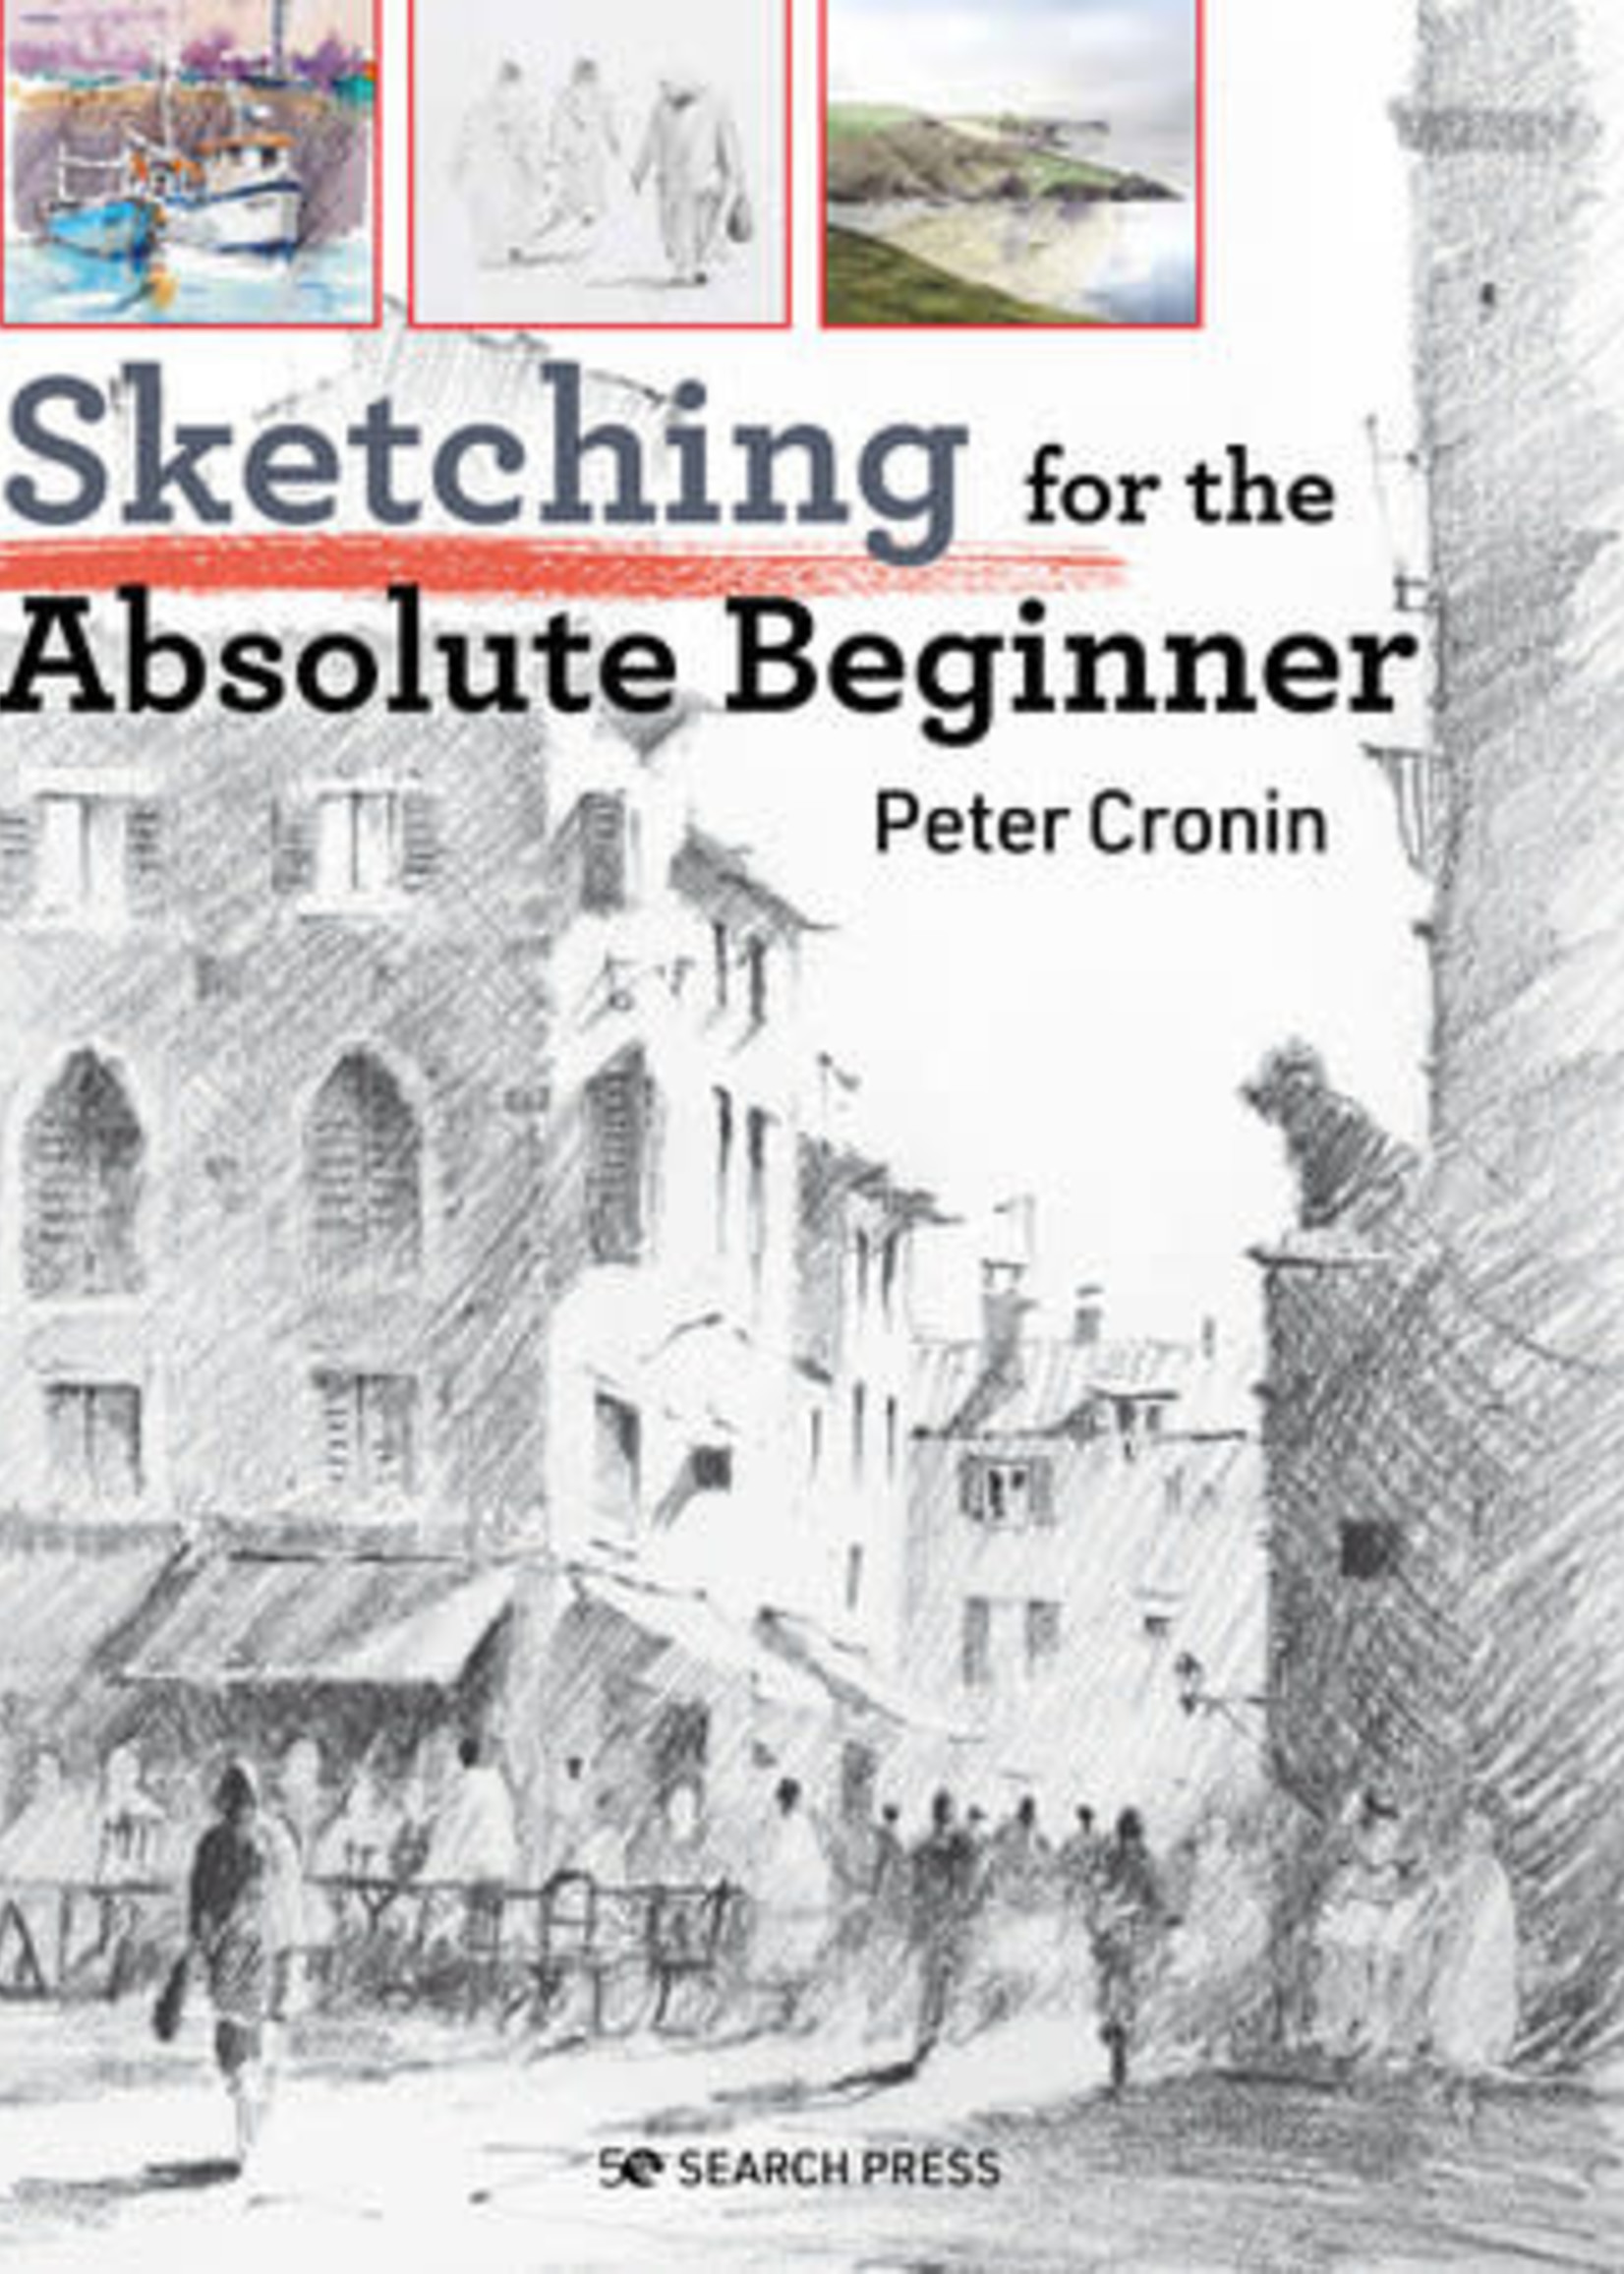 Sketching for the Absolute Beginner by Peter Cronin